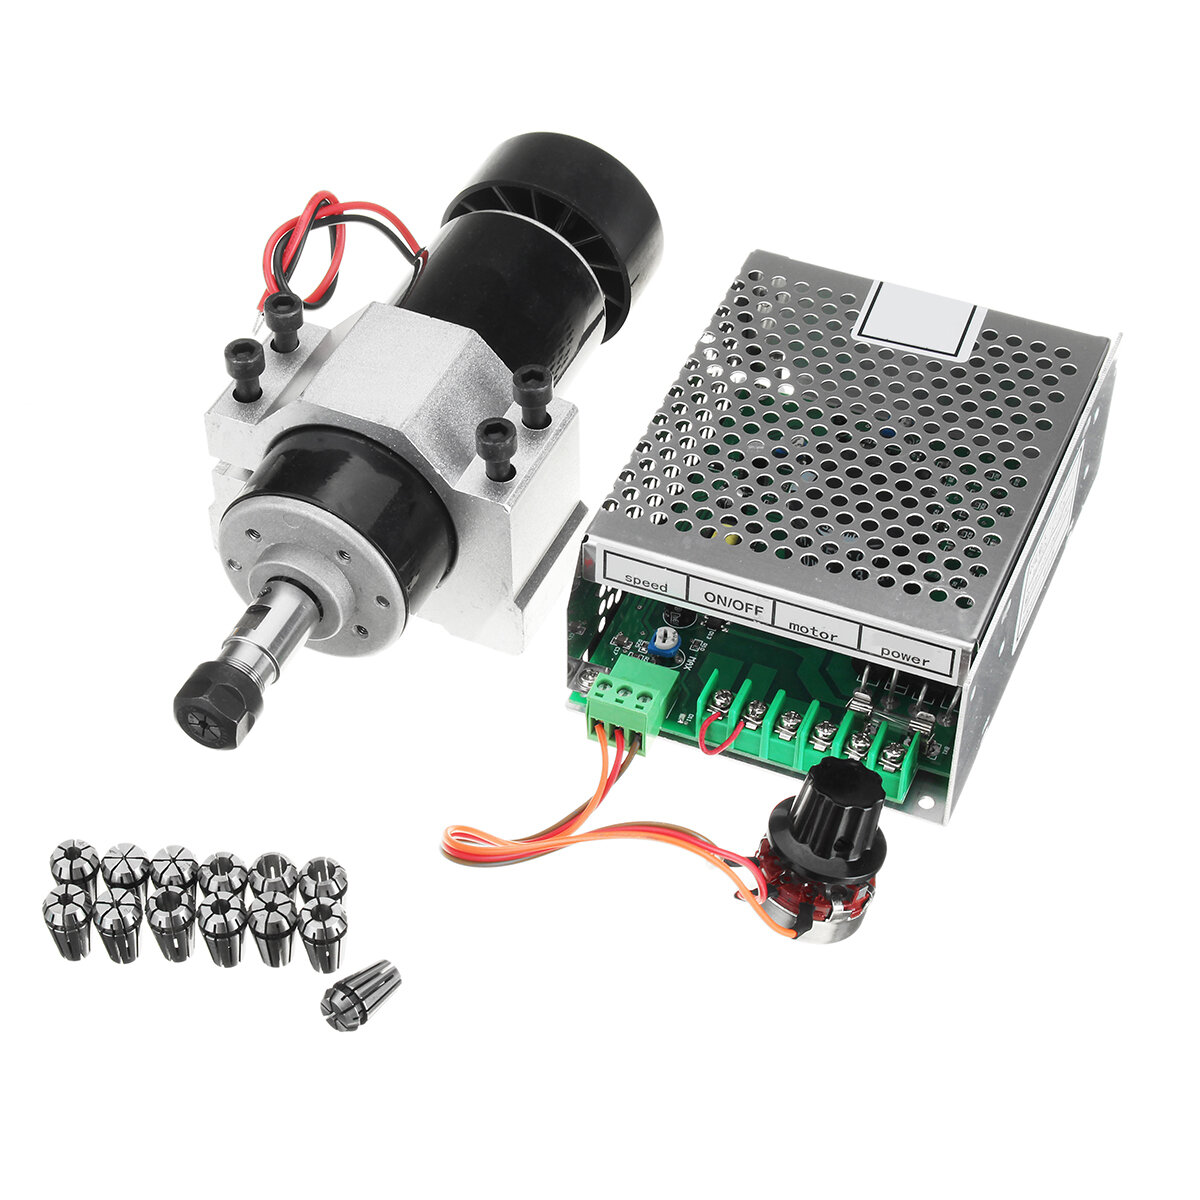 Image of AC 110-220V 500W Air Cooling Spindle Motor with 52mm Clamp and Power Supply Speed Governor